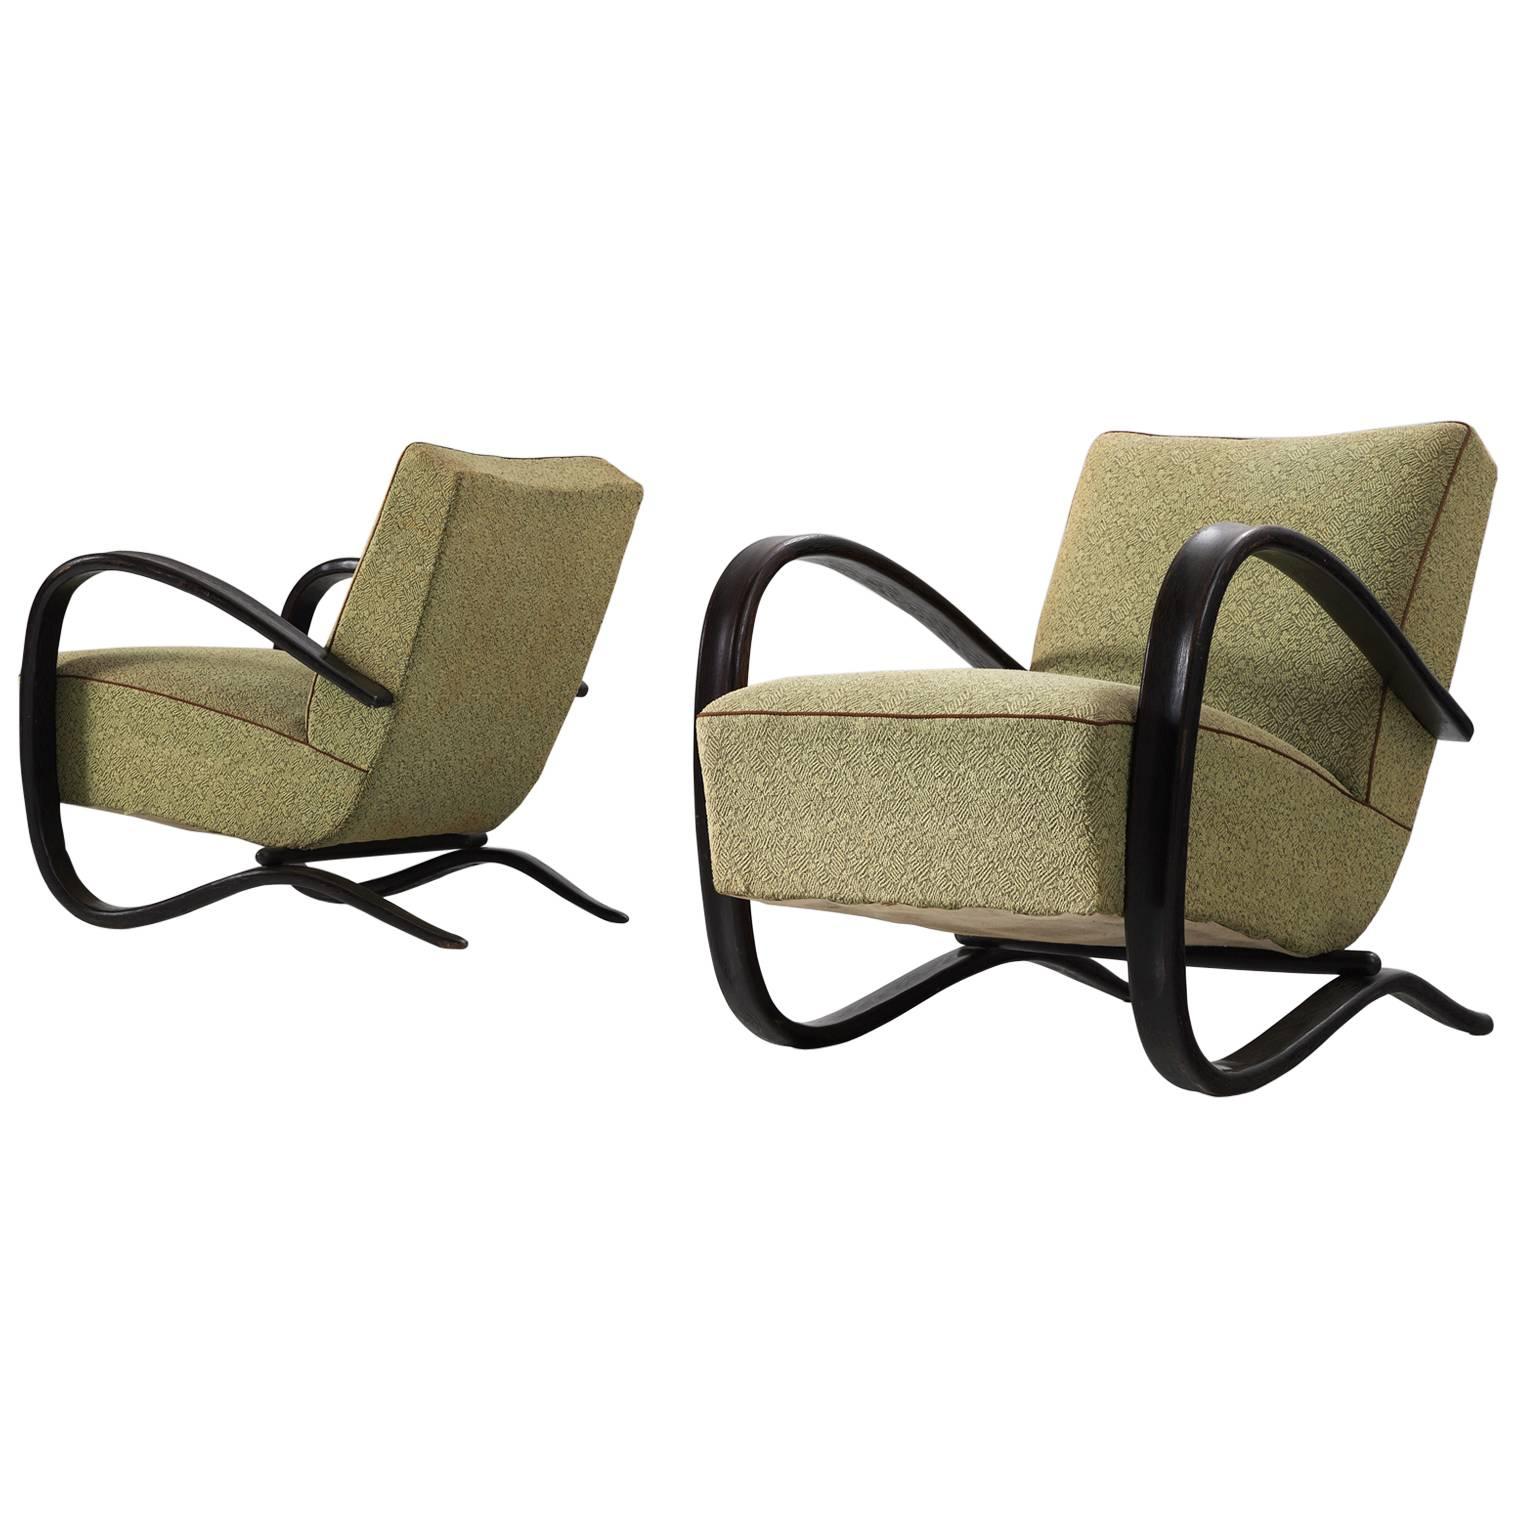 Jindrich Halabala Pair of Armchairs in Original Fabric Upholstery